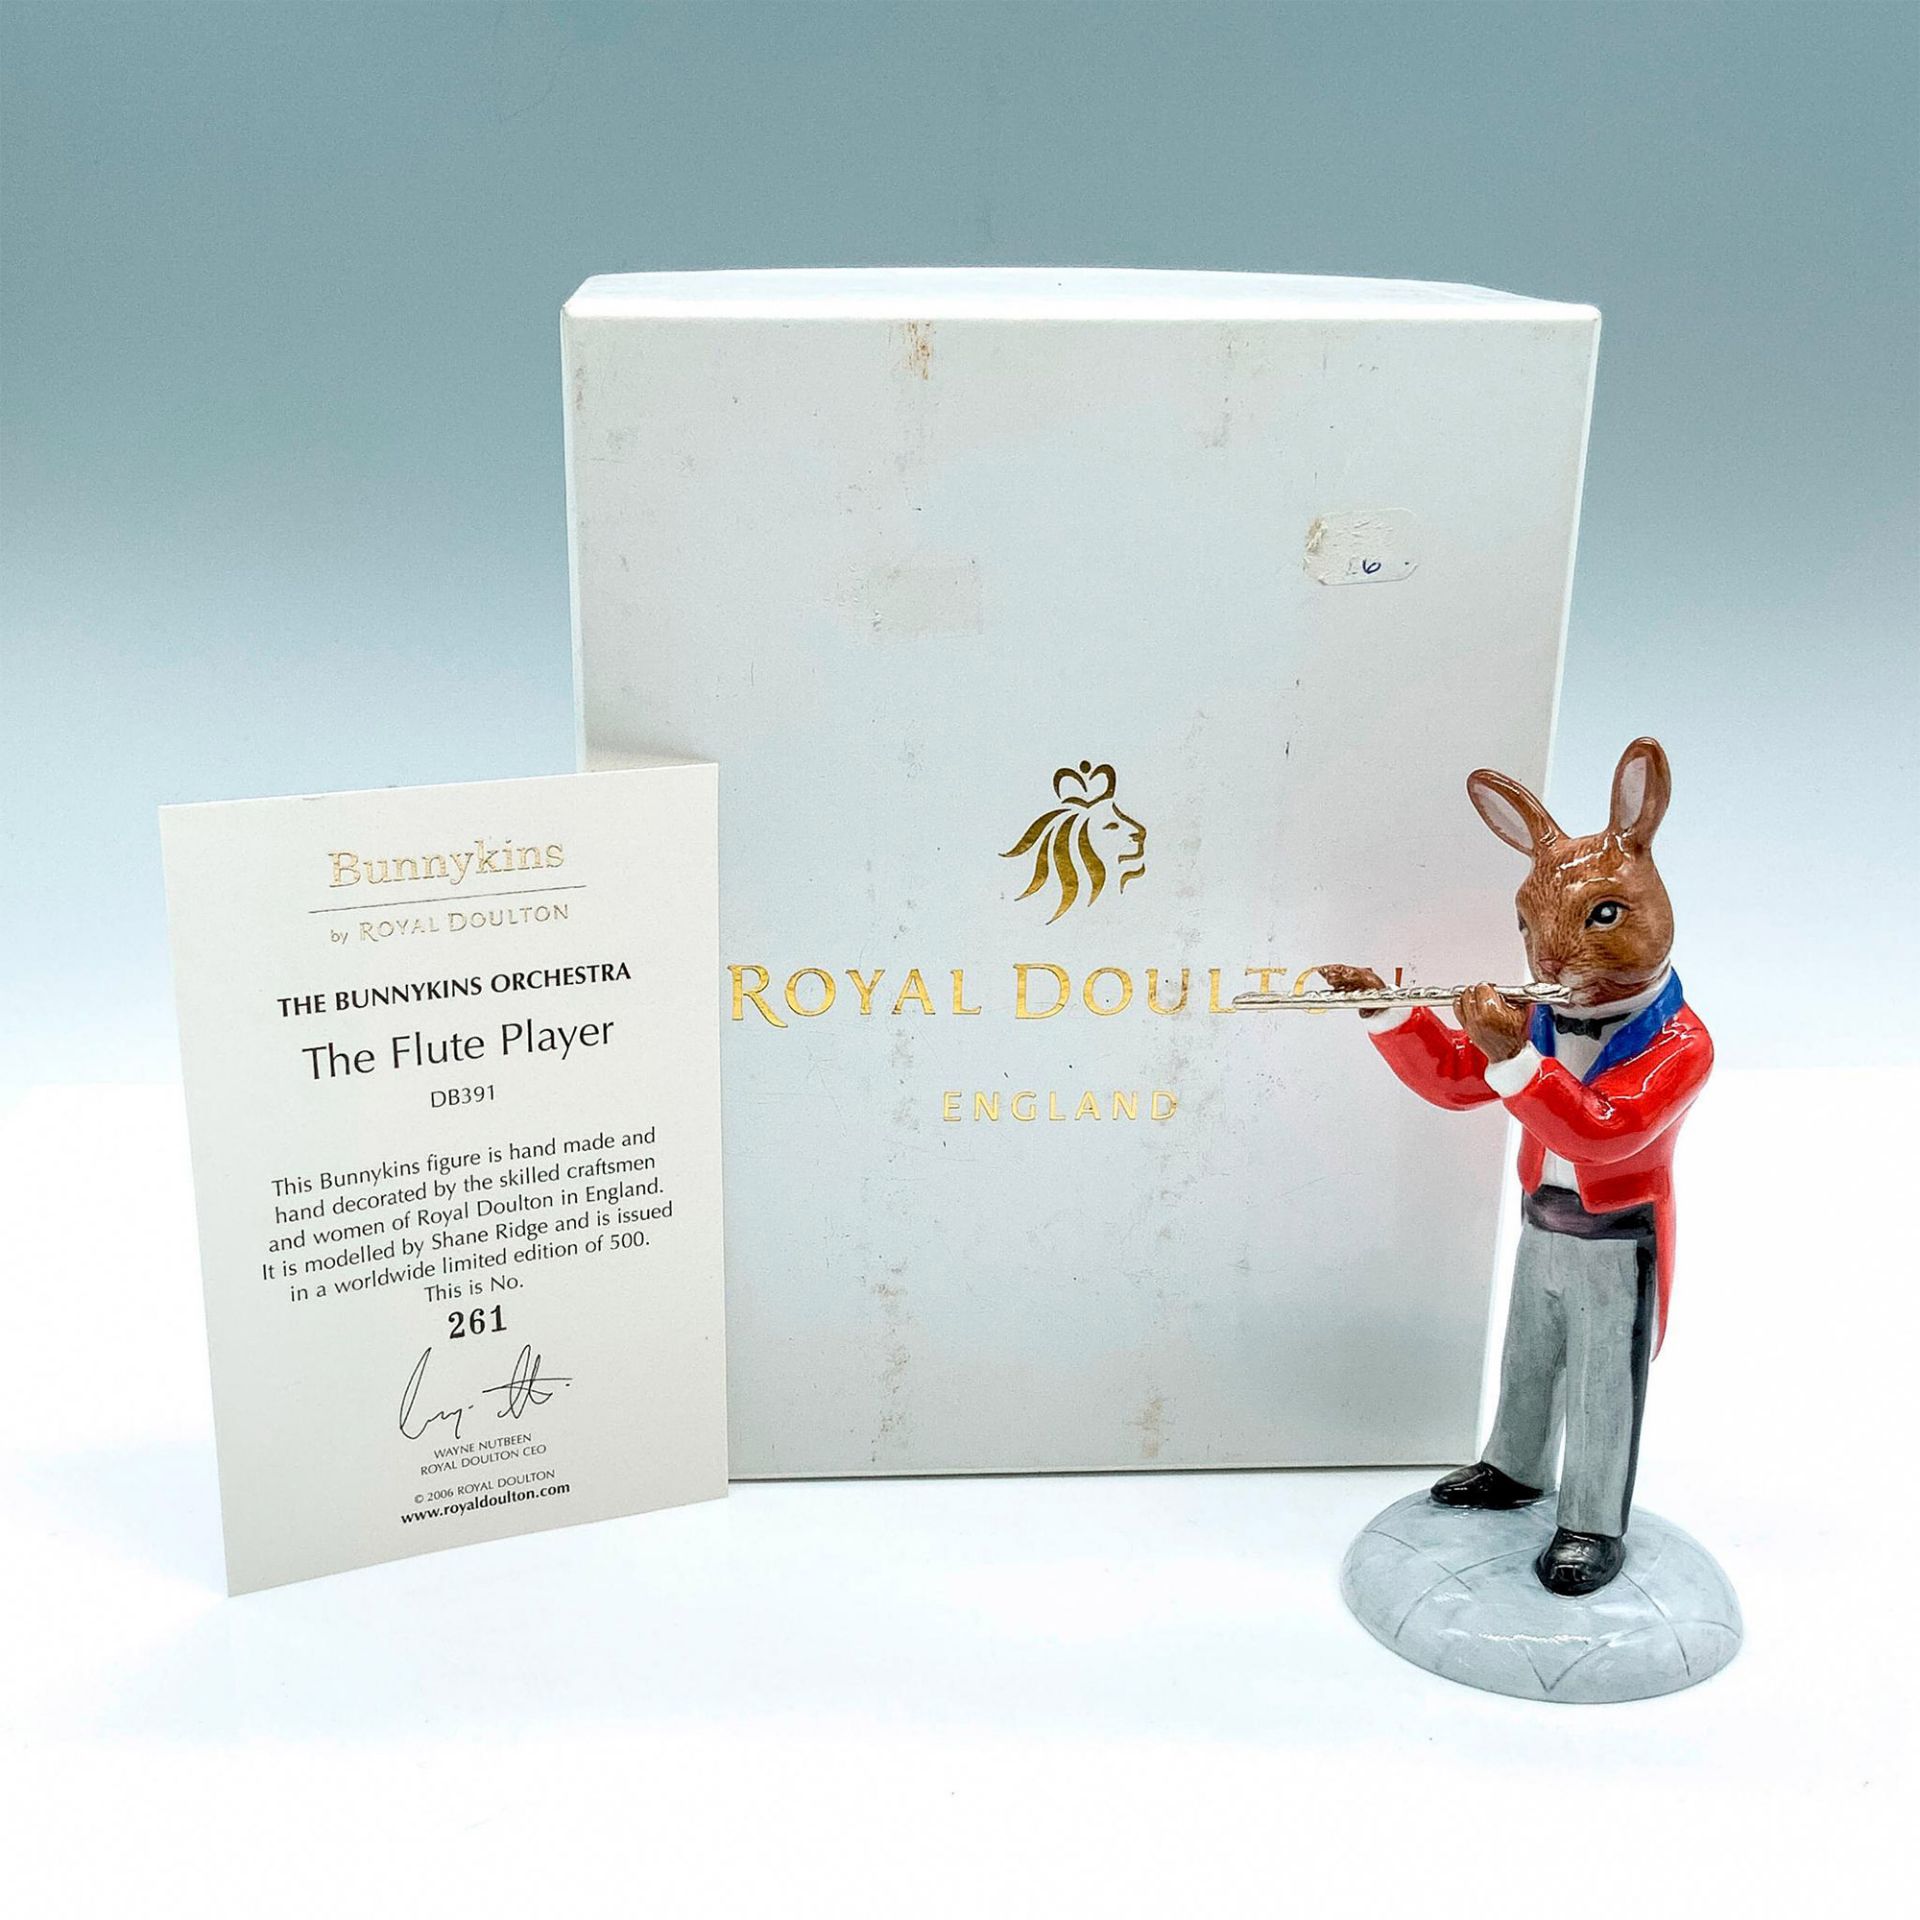 Royal Doulton Bunnykins LE Figurine, The Flute Player DB391 - Image 4 of 4